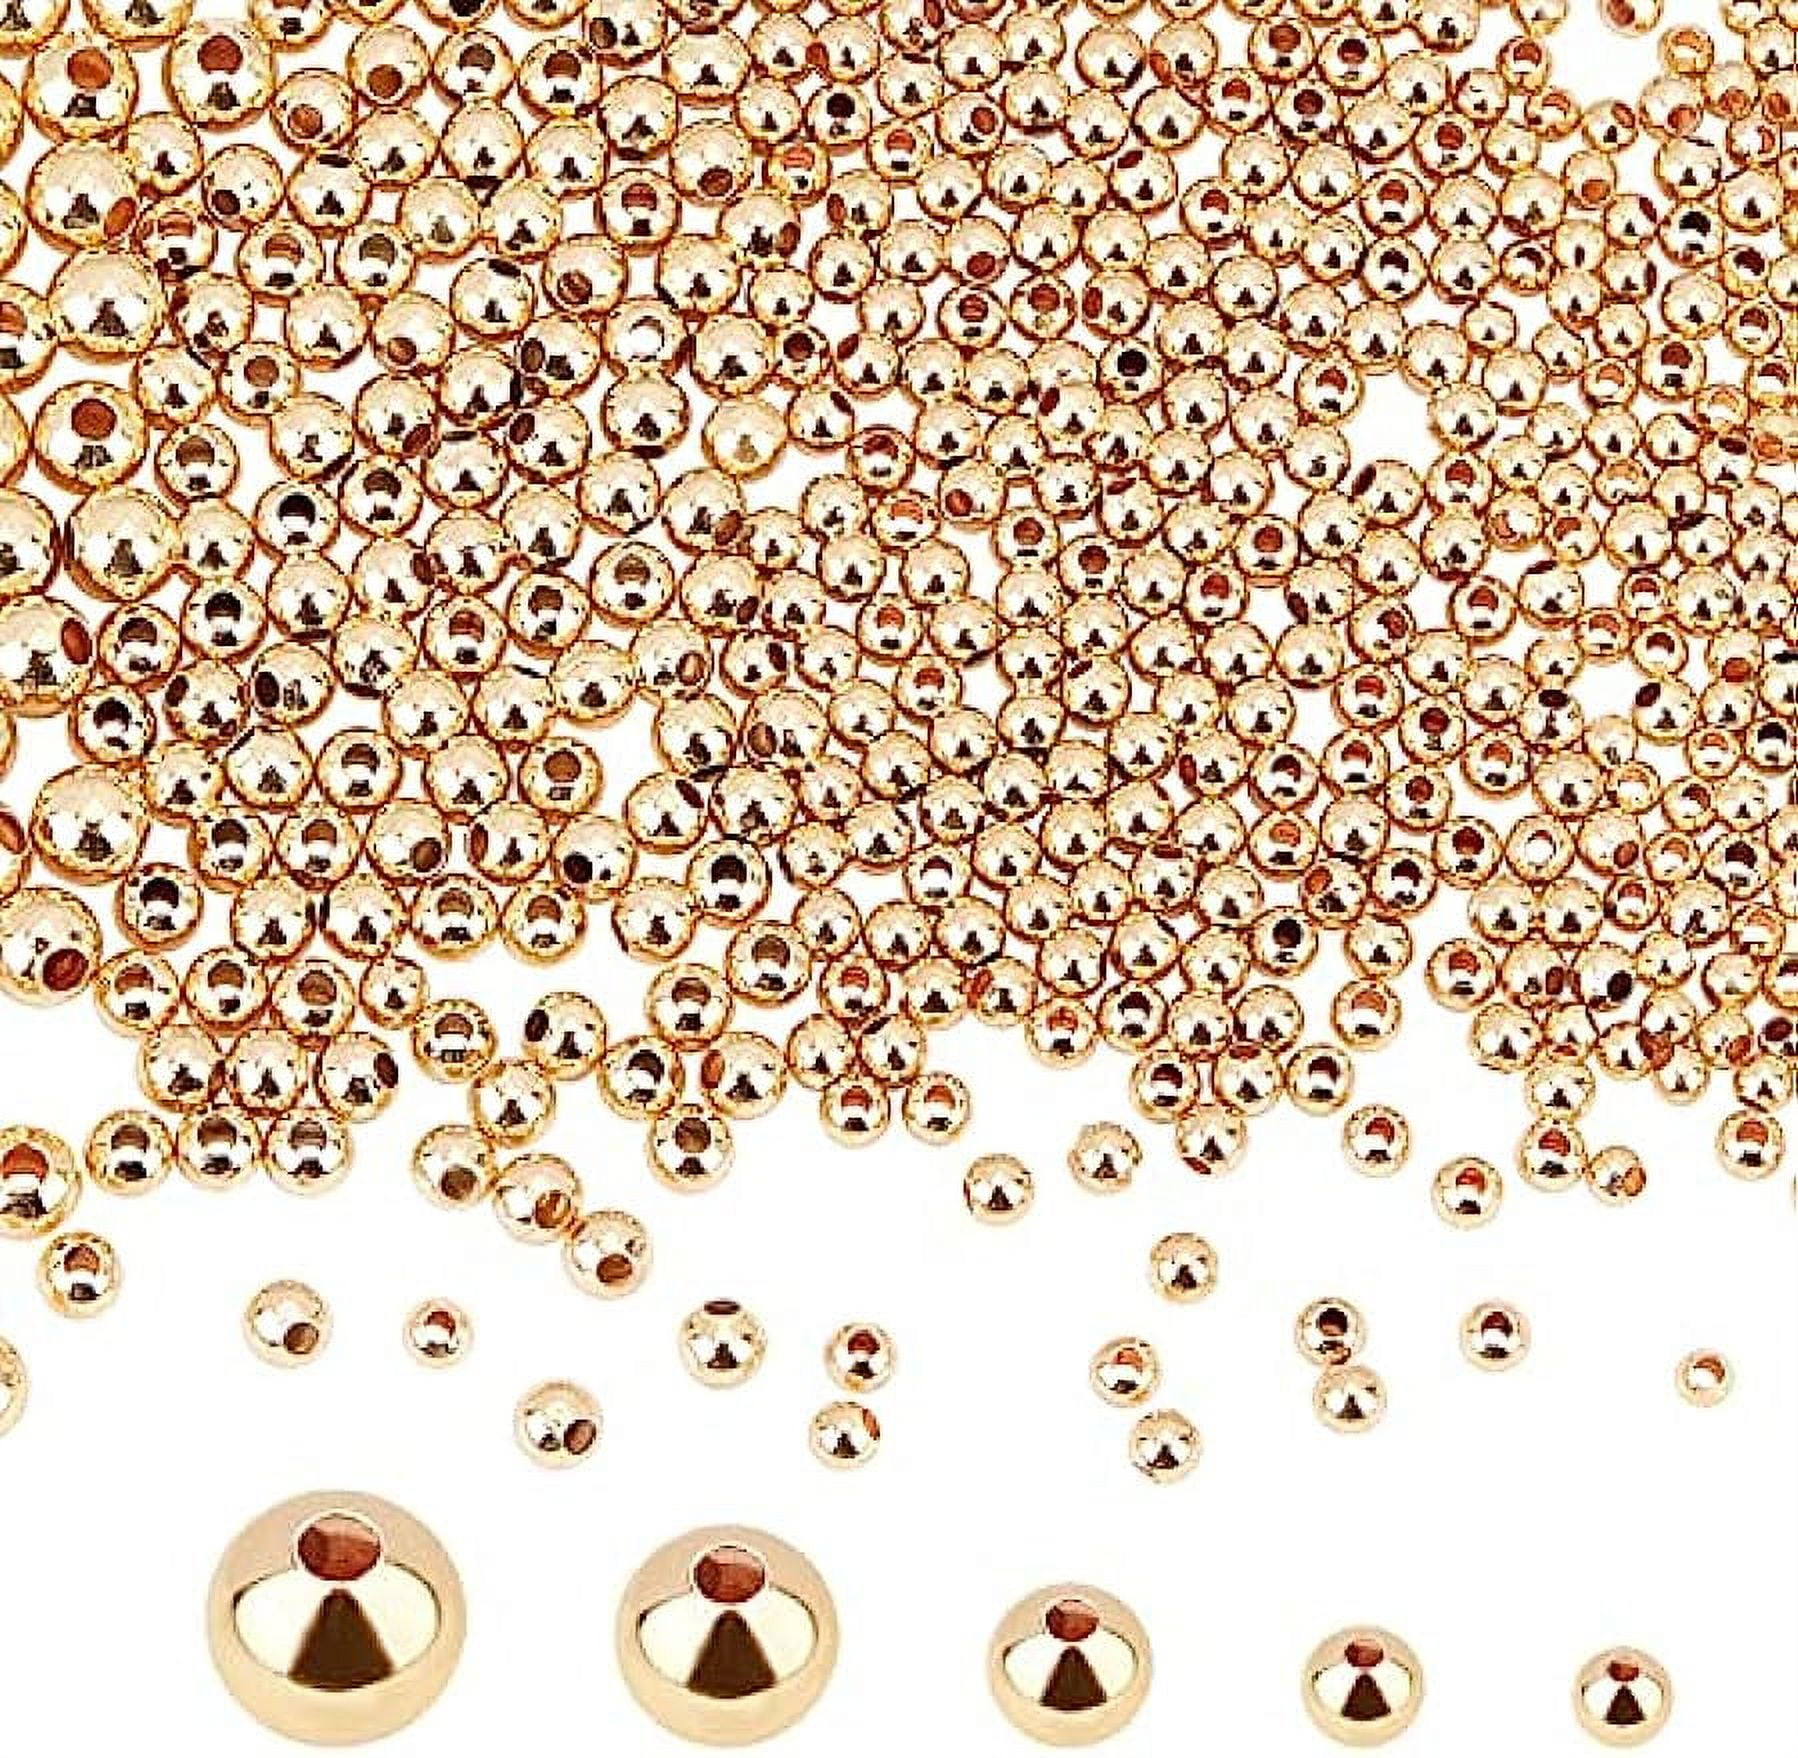 695pcs 18K Gold Spacers Beads Seamless Smooth Beads Loose Beads